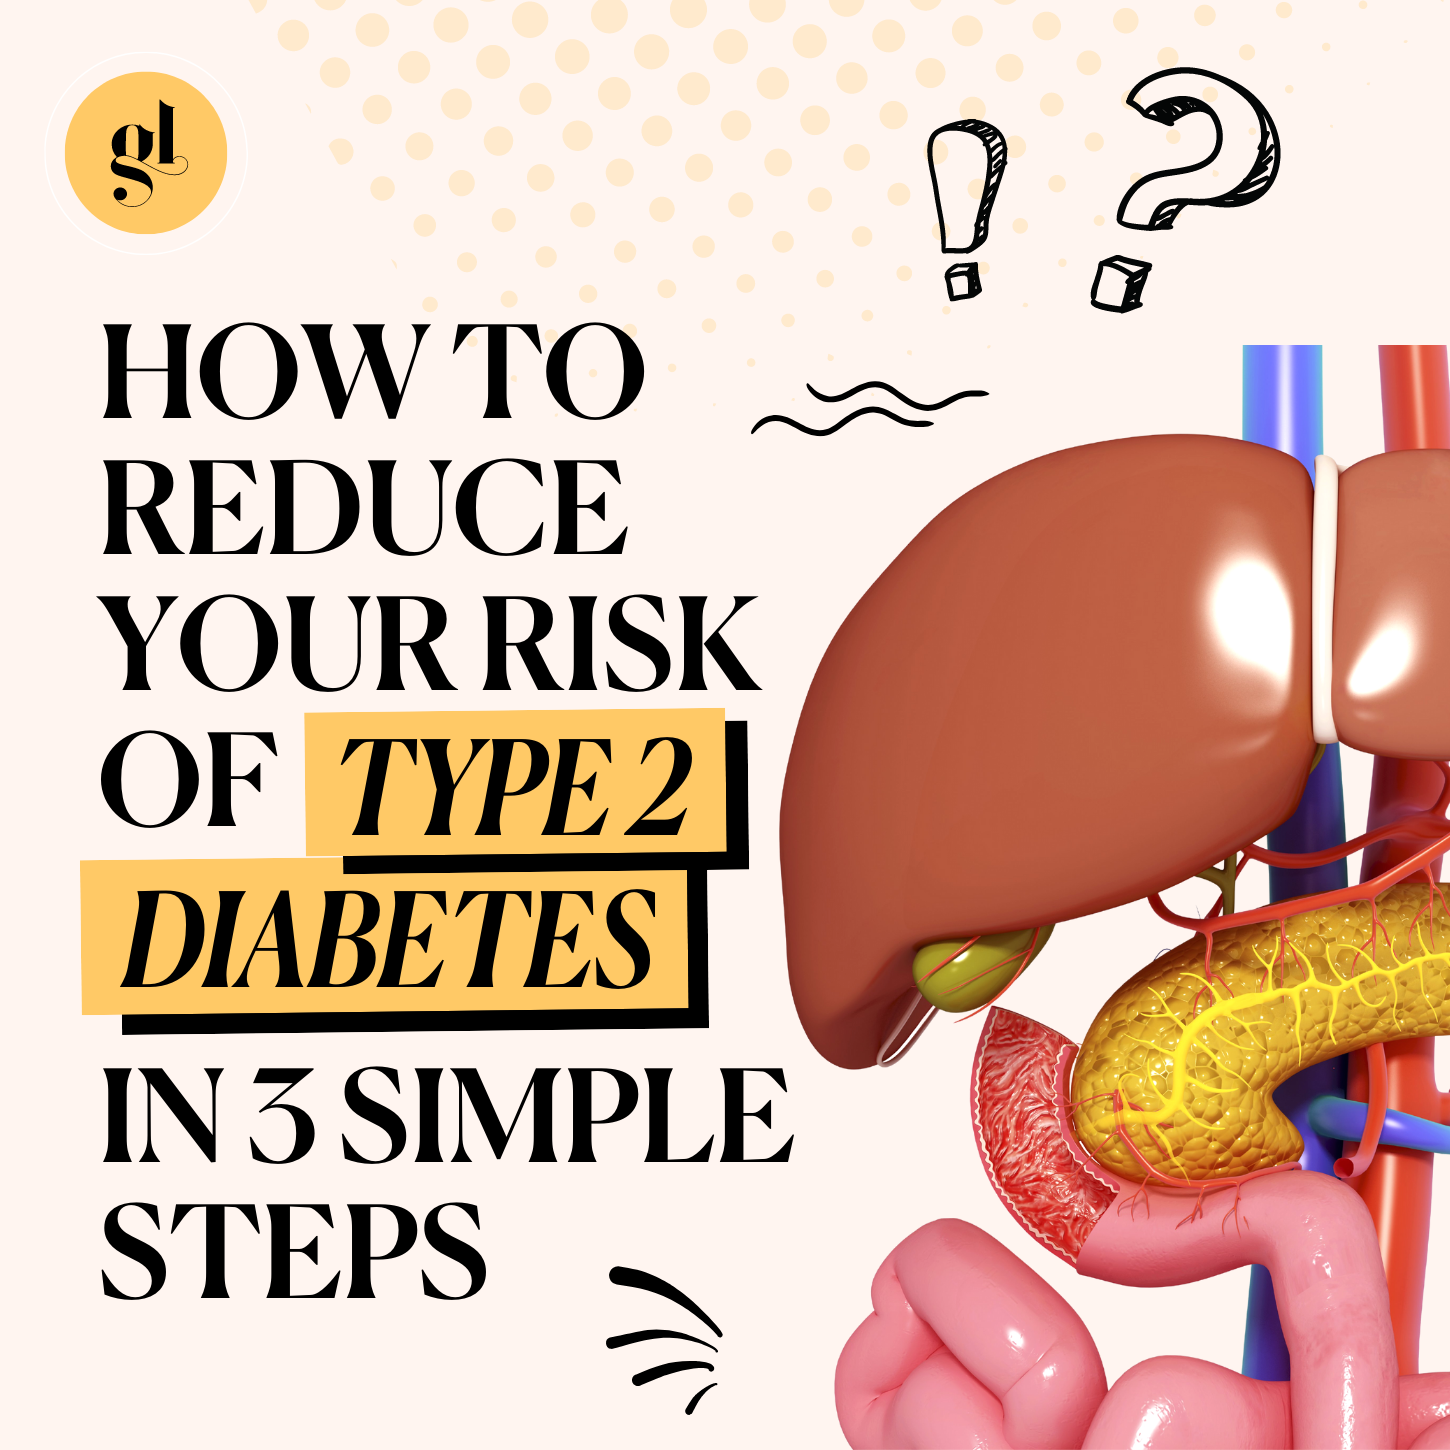 How to Reduce your Risk of Type 2 Diabetes in 3 Simple Steps